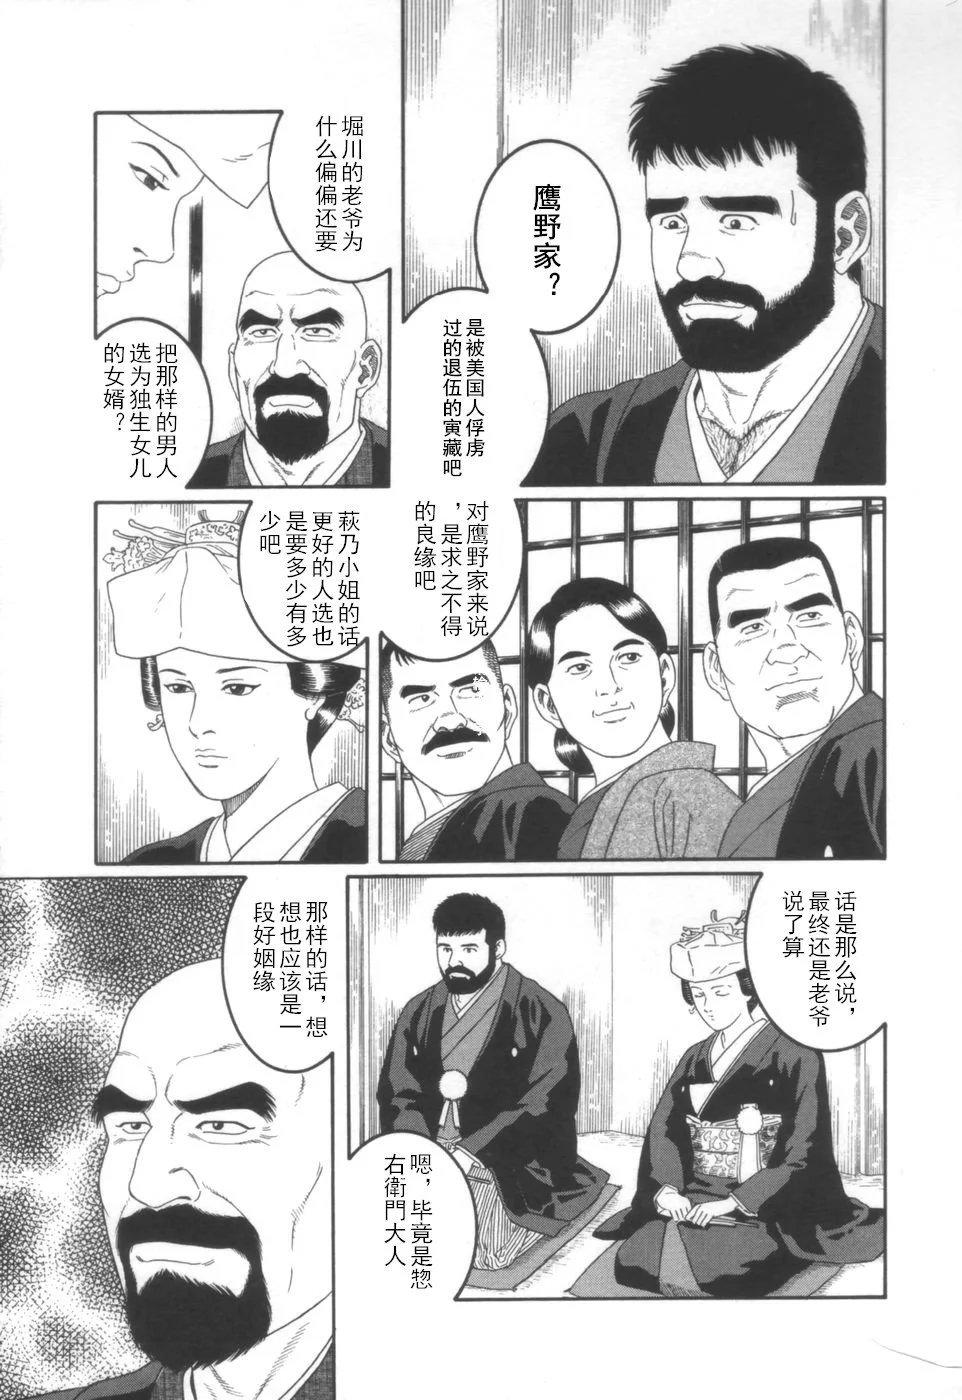 Penetration Gedou no Ie Joukan | 邪道之家 Vol. 1 Ch.1 Slapping - Page 8